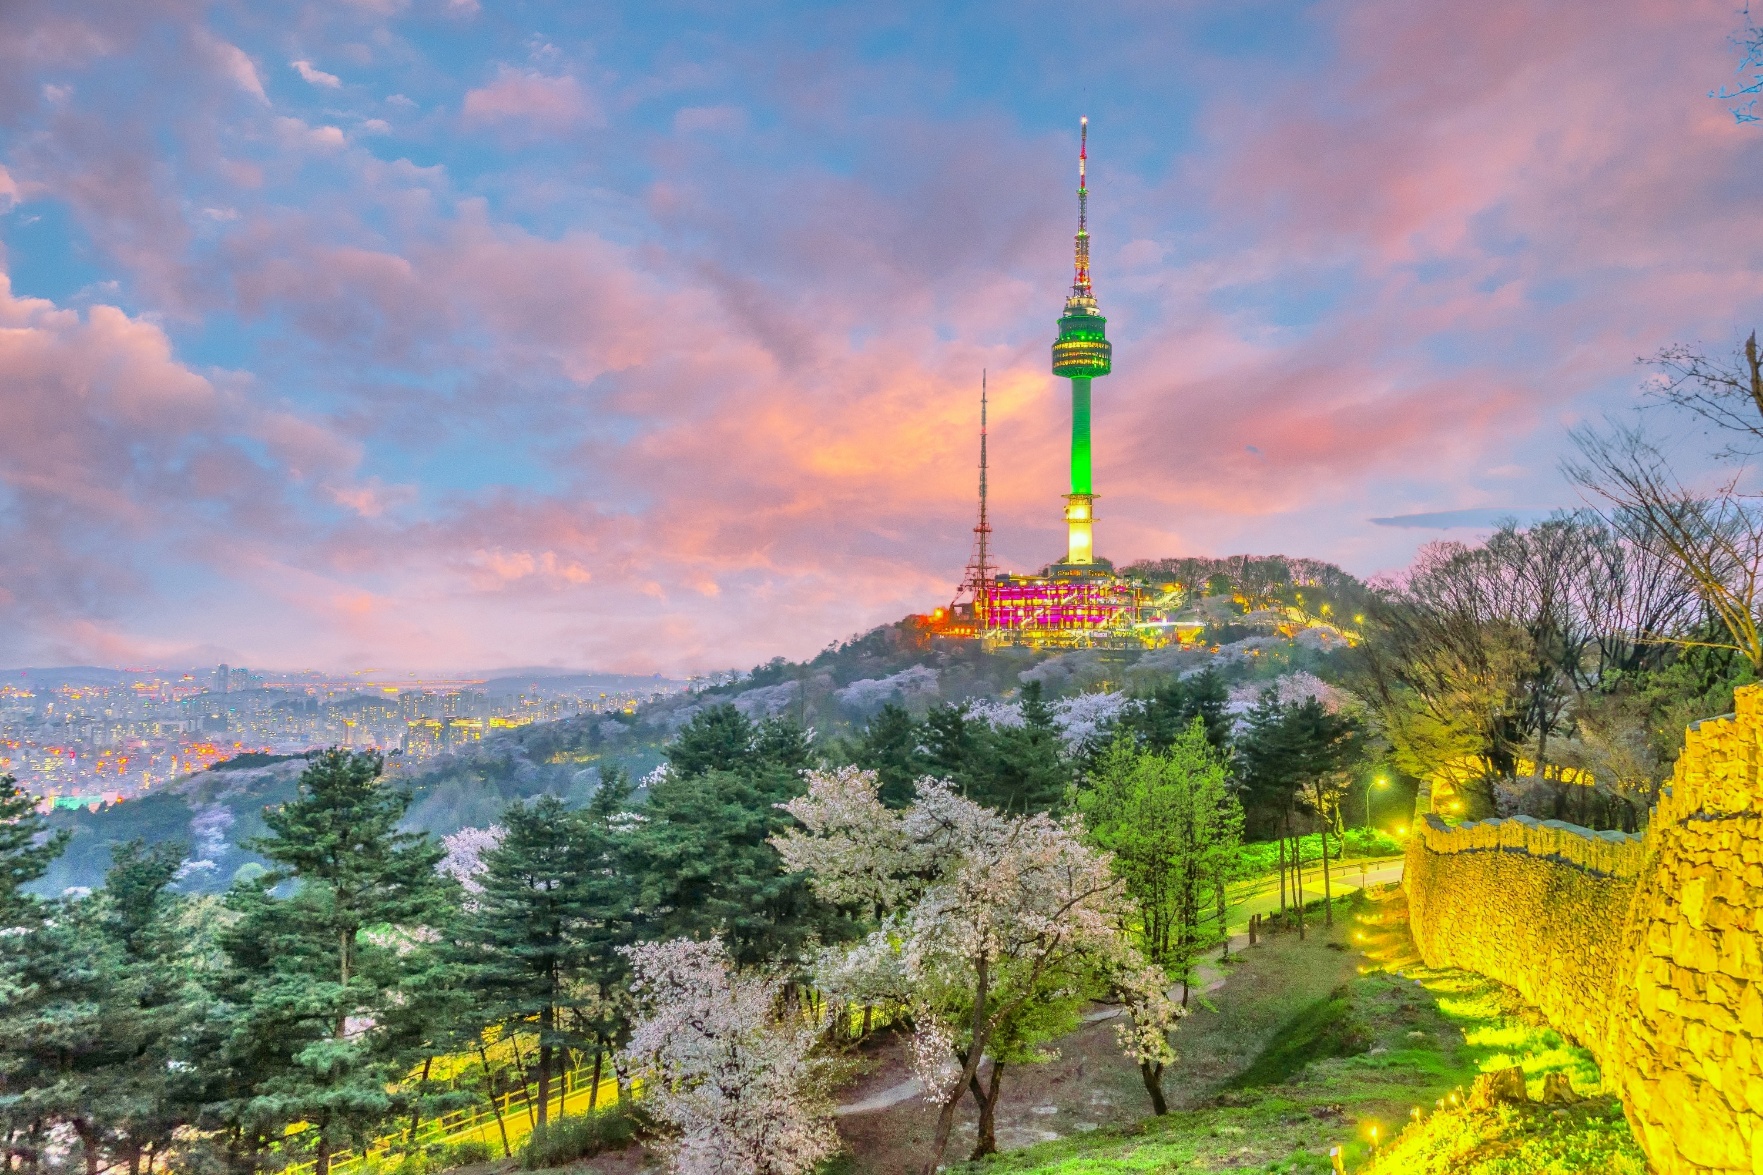 Namsan Mountain Park attraction reviews - Namsan Mountain Park tickets -  Namsan Mountain Park discounts - Namsan Mountain Park transportation,  address, opening hours - attractions, hotels, and food near Namsan Mountain  Park - Trip.com